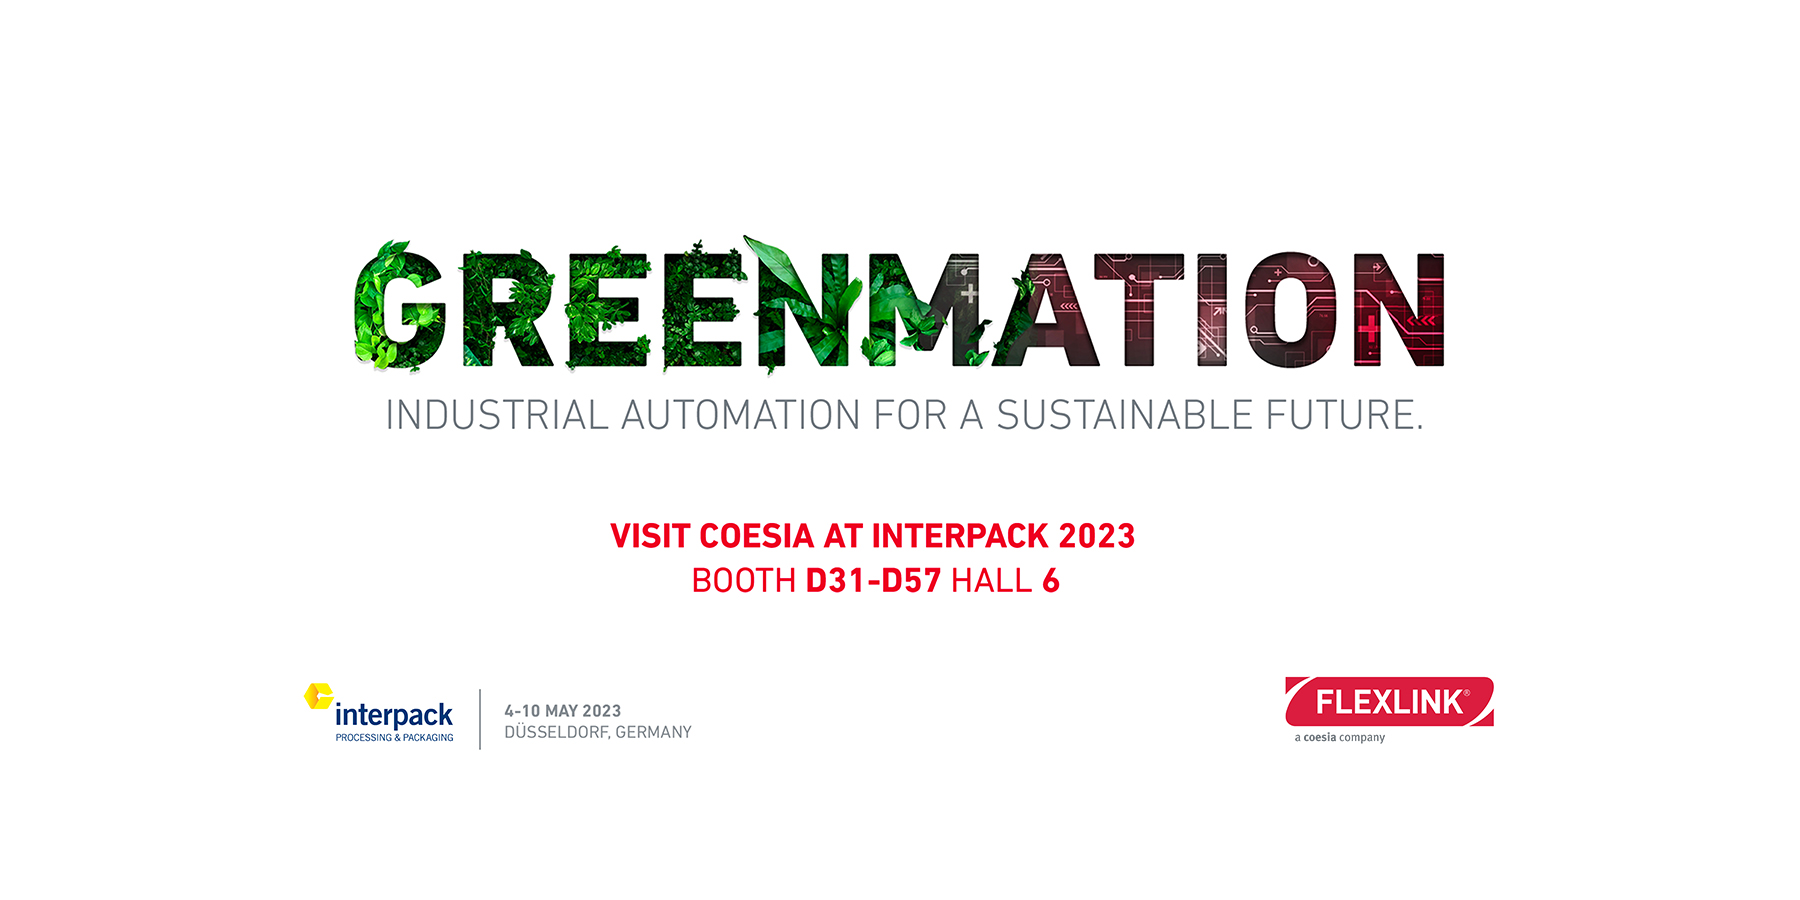 GREENMATION underlines the commitment of the Coesia companies to a more sustainable future through automation solutions.